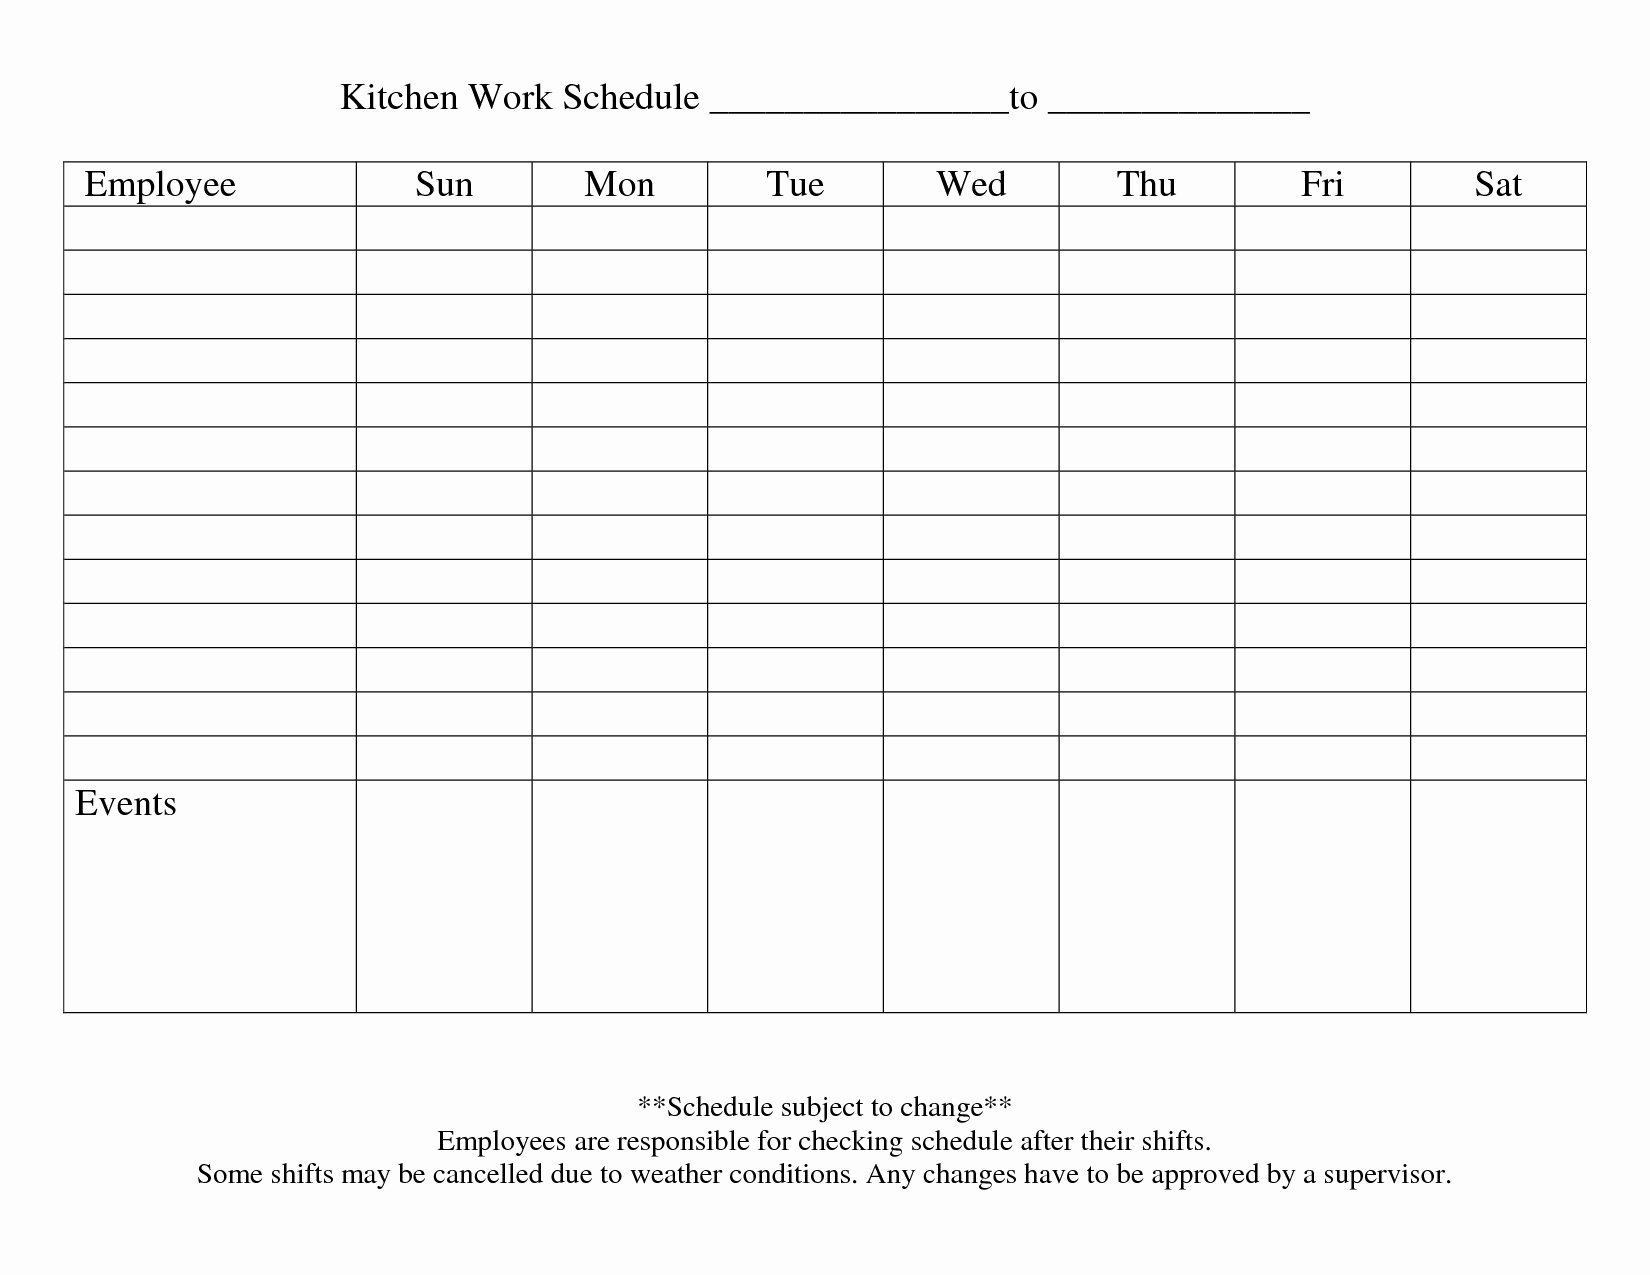 Awesome Sample Weekly Calendar Schedule Printable 13 Blank Weekly for Printable Blank Weekly Employee Schedule